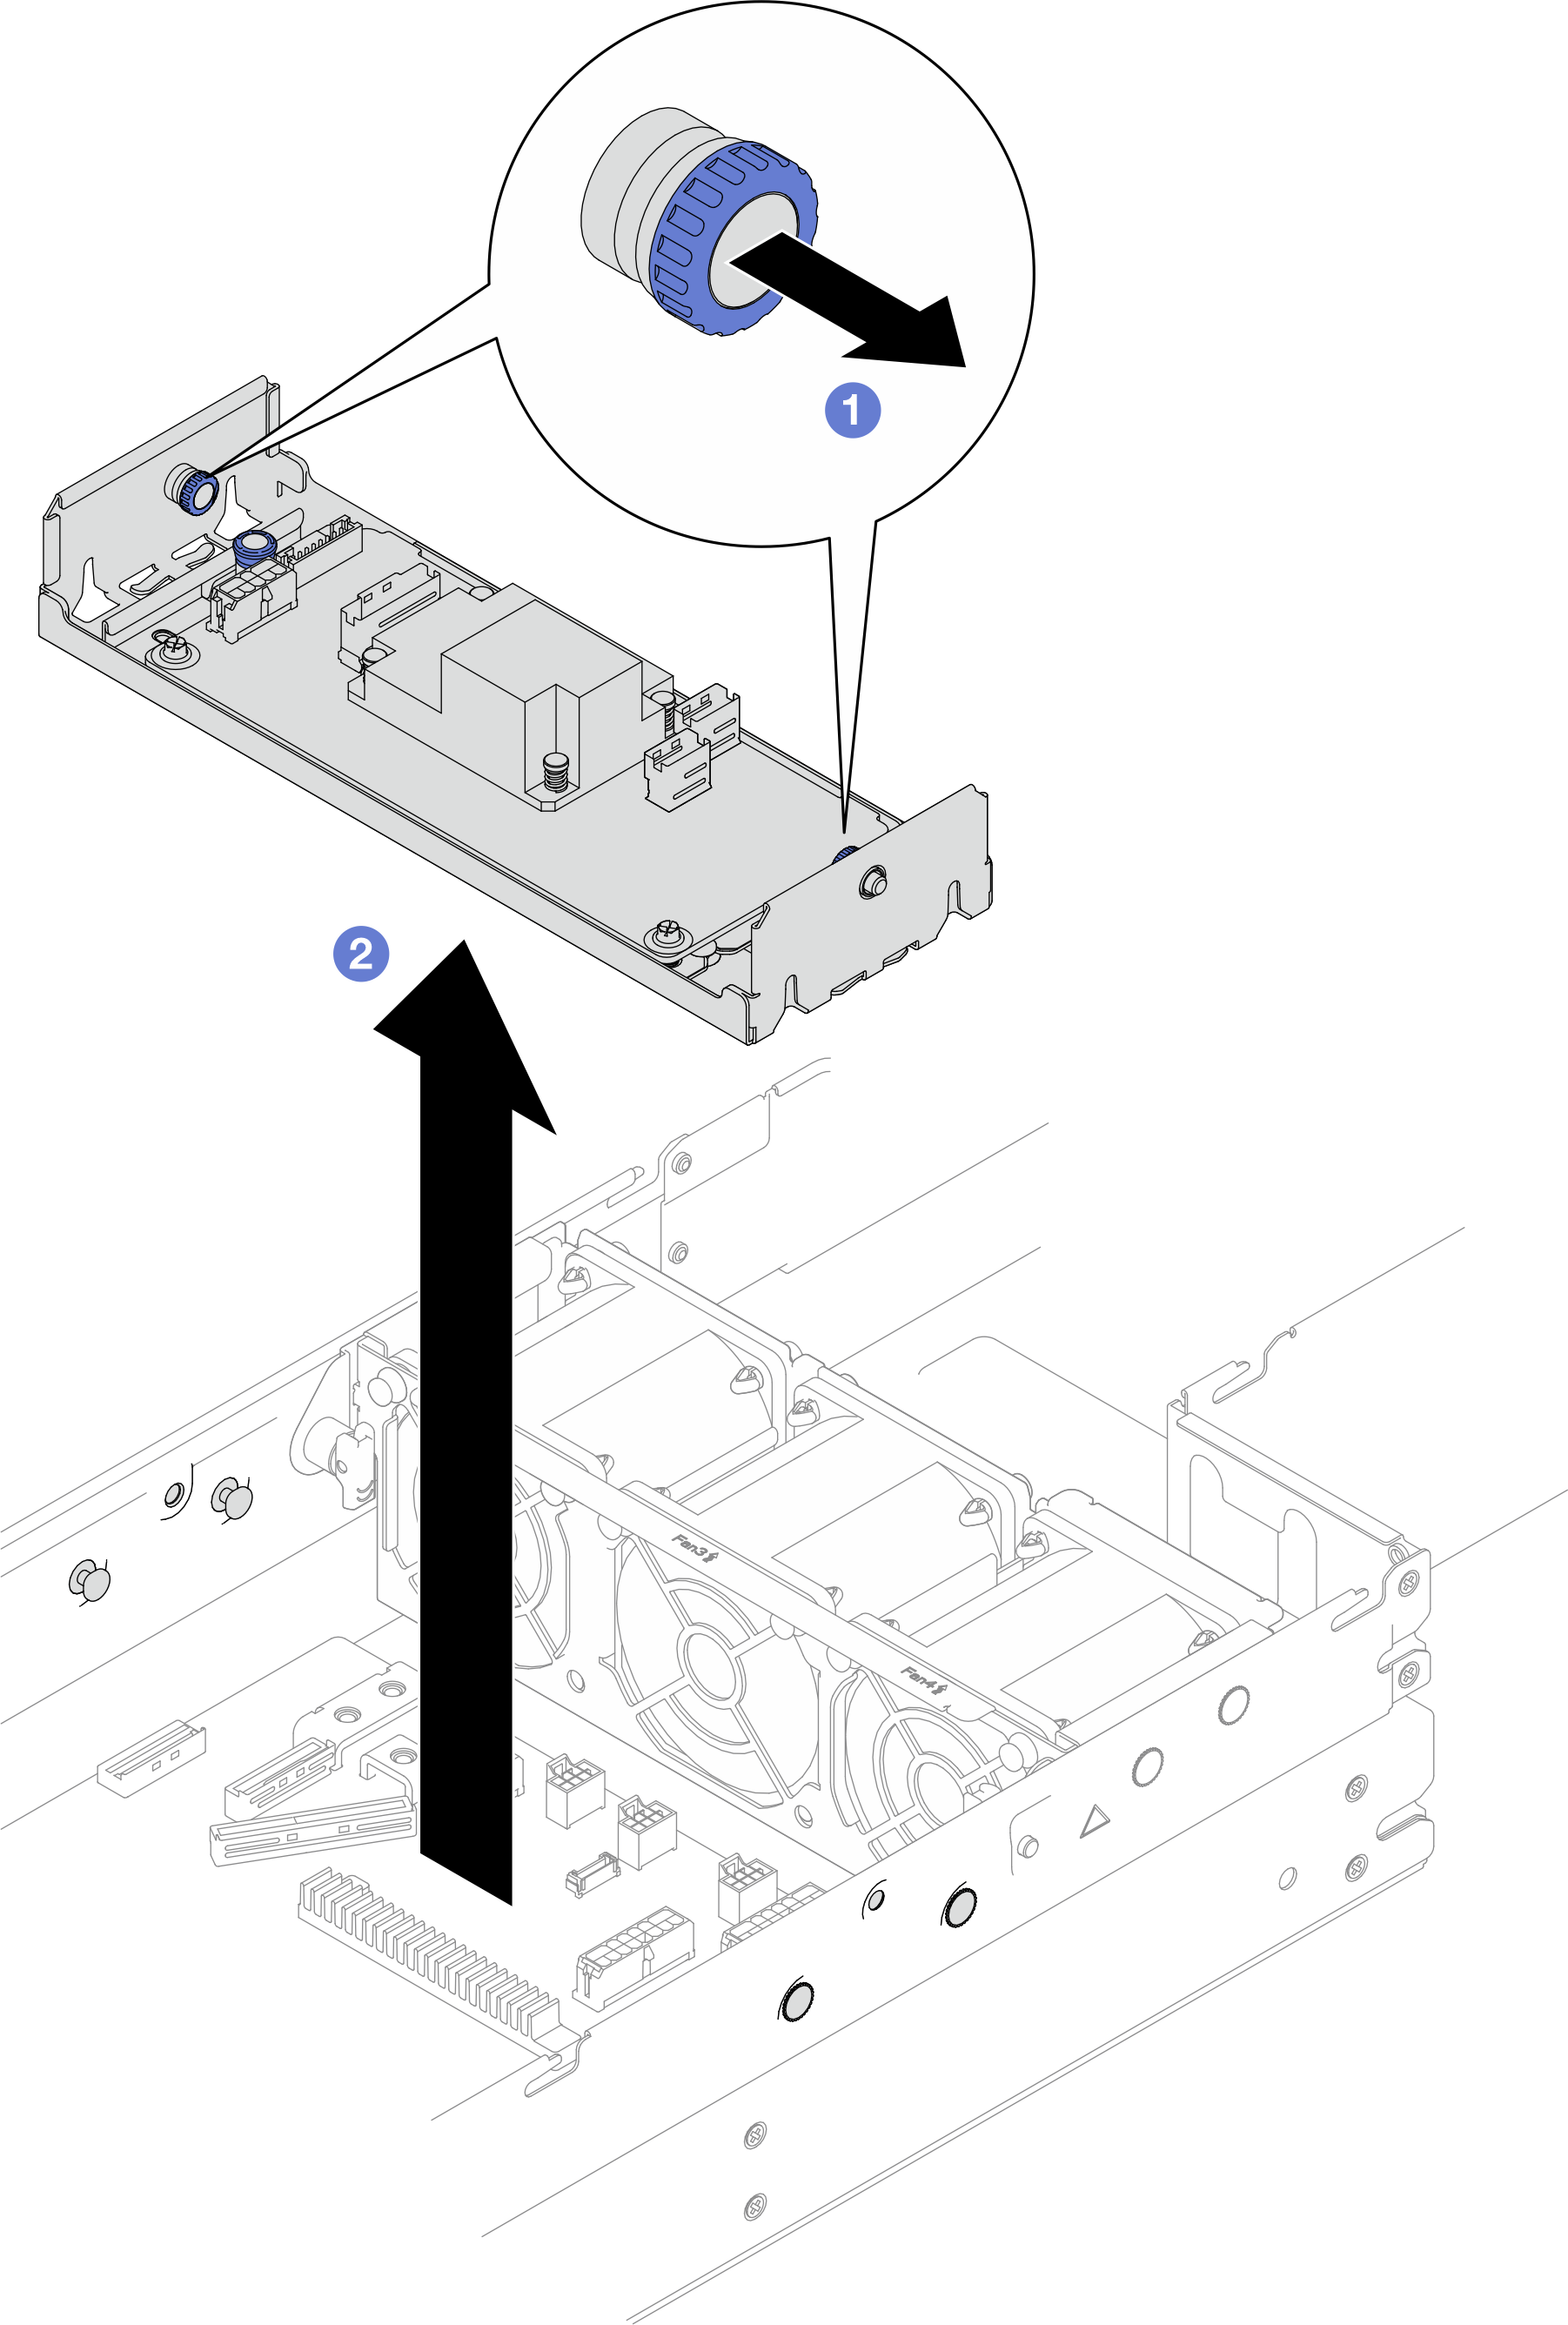 Removal of the internal adapter bracket